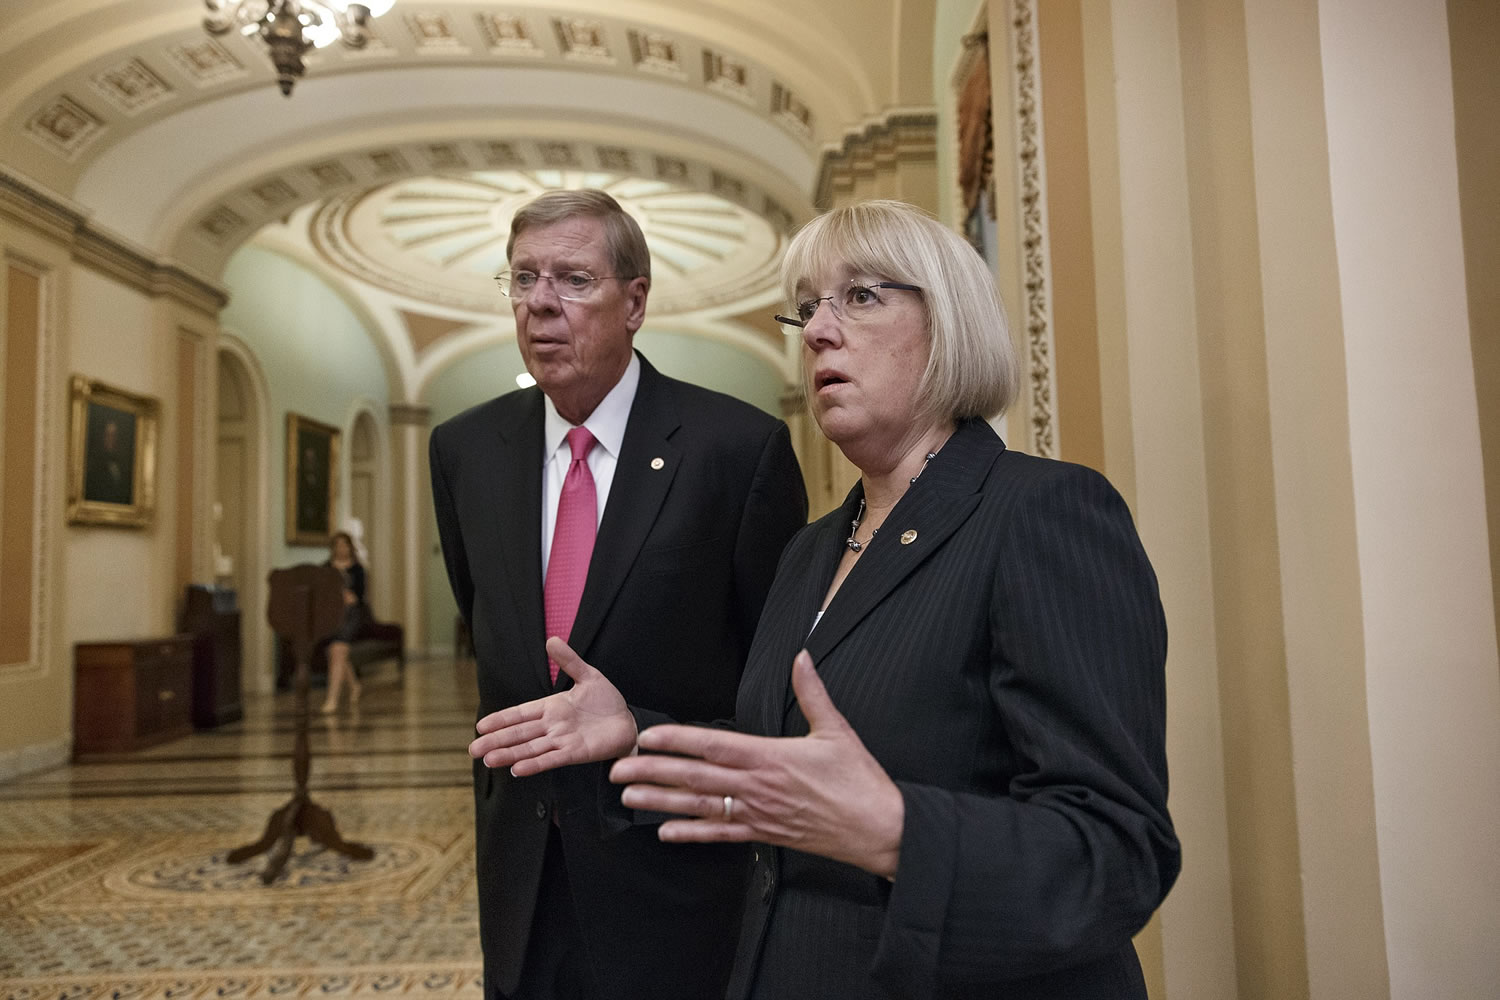 Sen. Johnny Isakson, R-Ga., left, and Sen. Patty Murray, D-Wash., meet before walking into the Senate chamber on Capitol Hill in Washington on Wednesday.